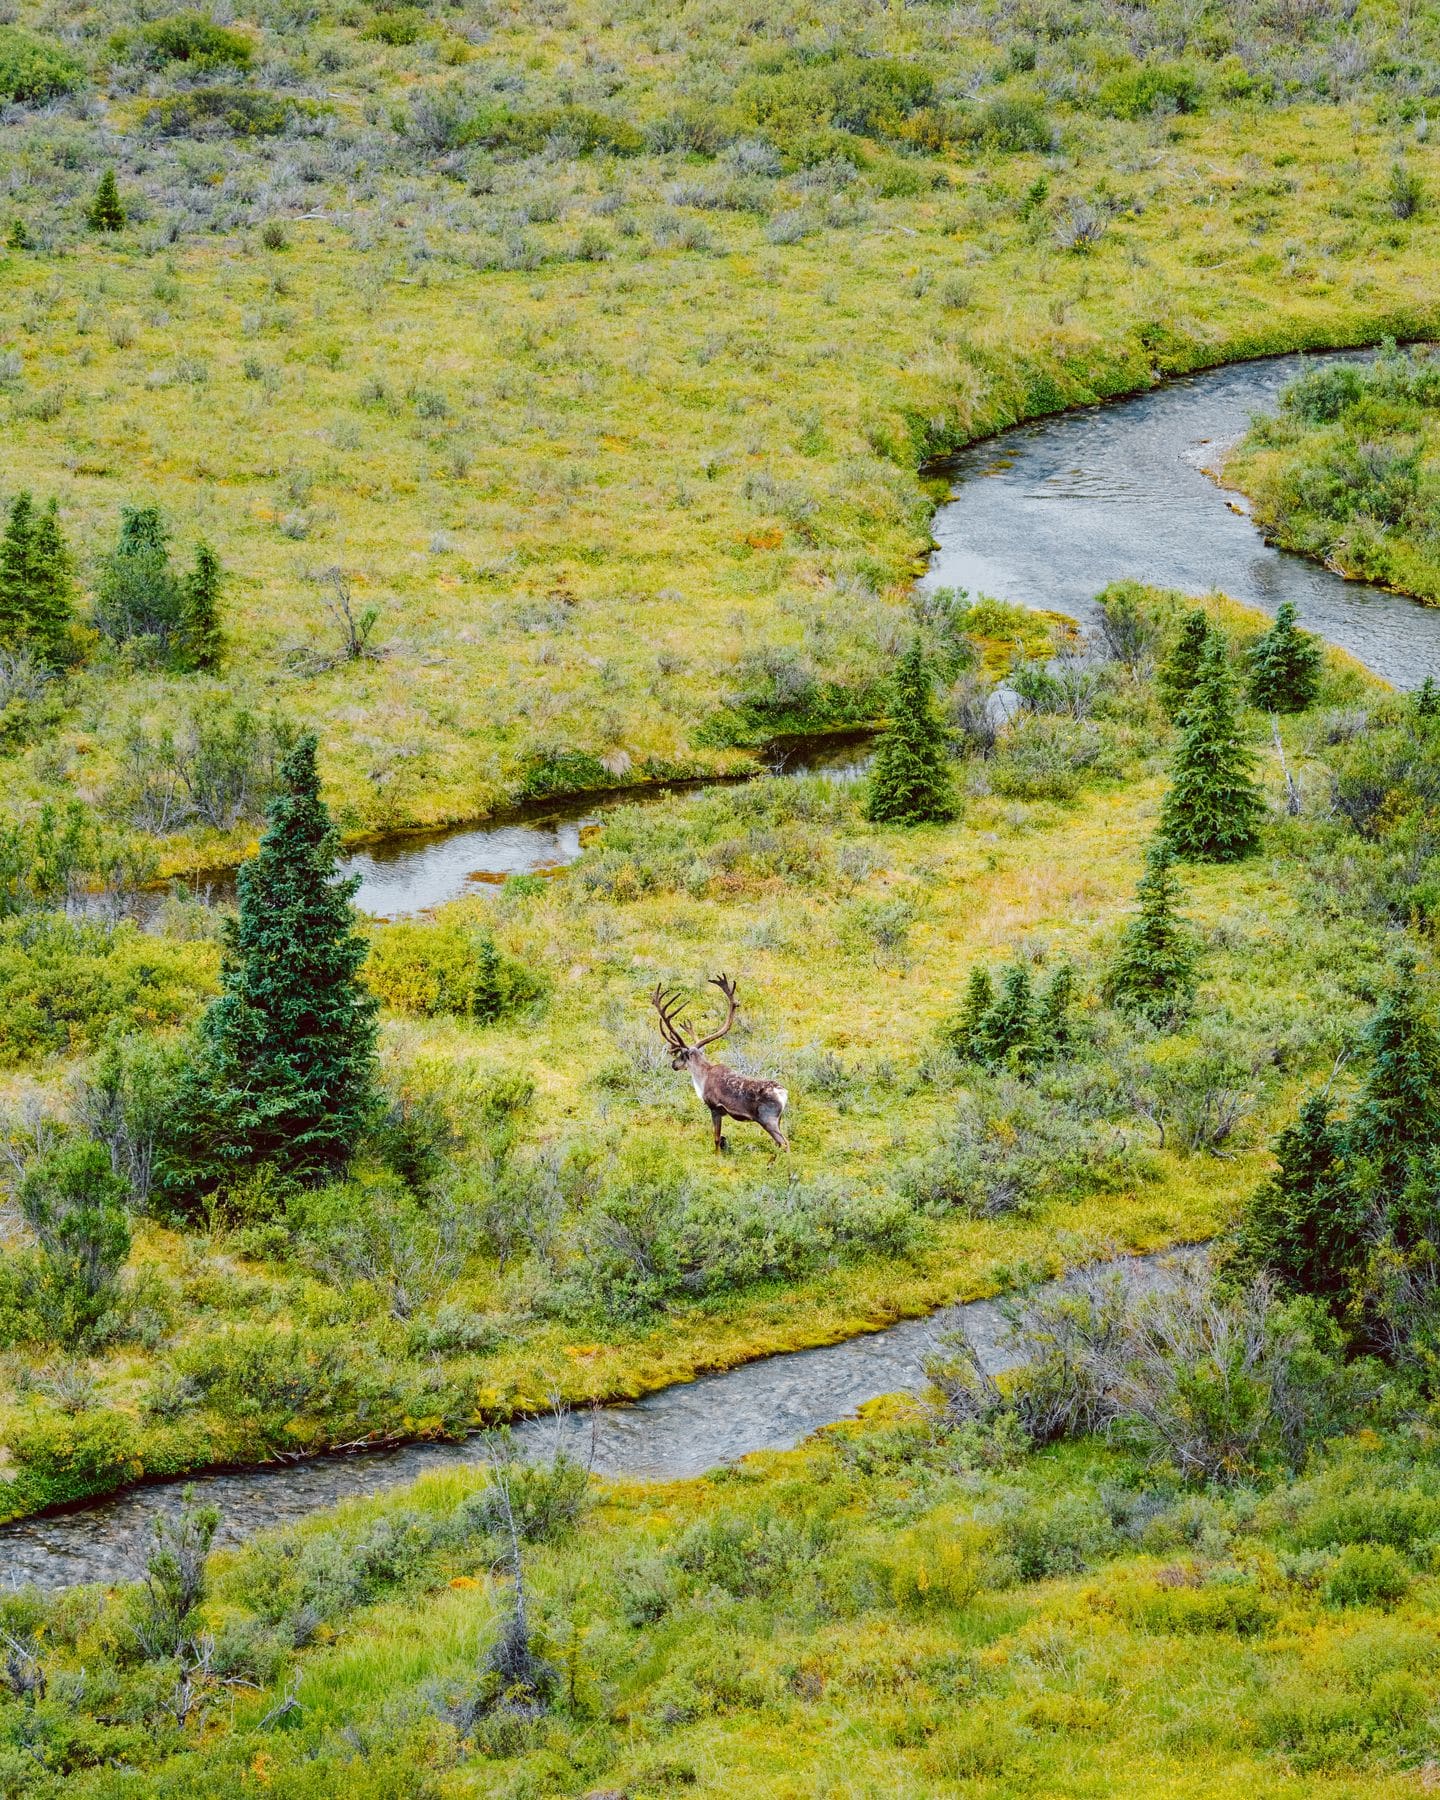 A large buck deer stands on the grass between the channels of the stream